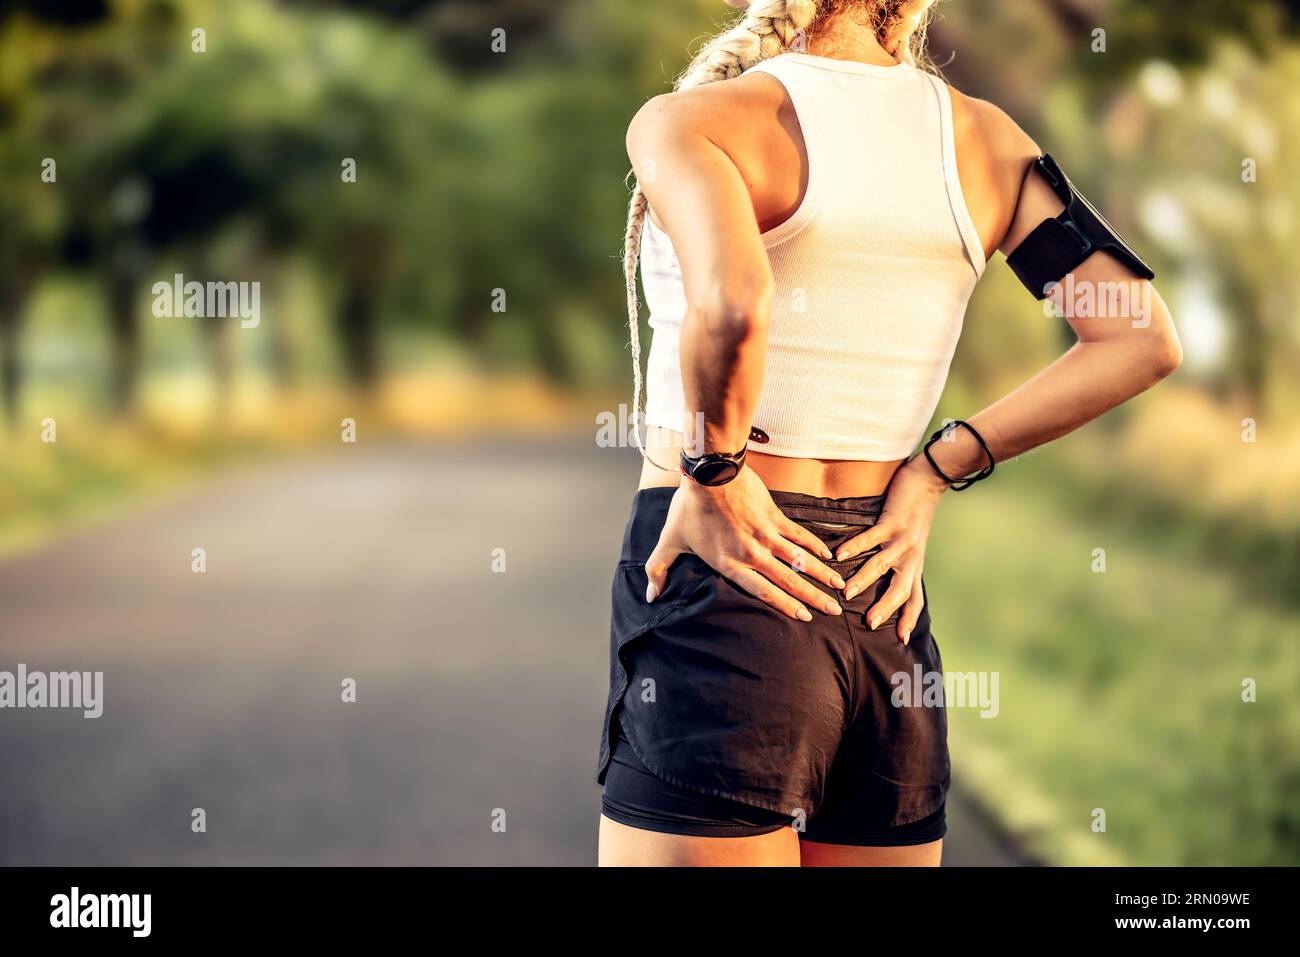 Young woman with an athletic figure and a lower back injury. Back pain during sports. Stock Photo